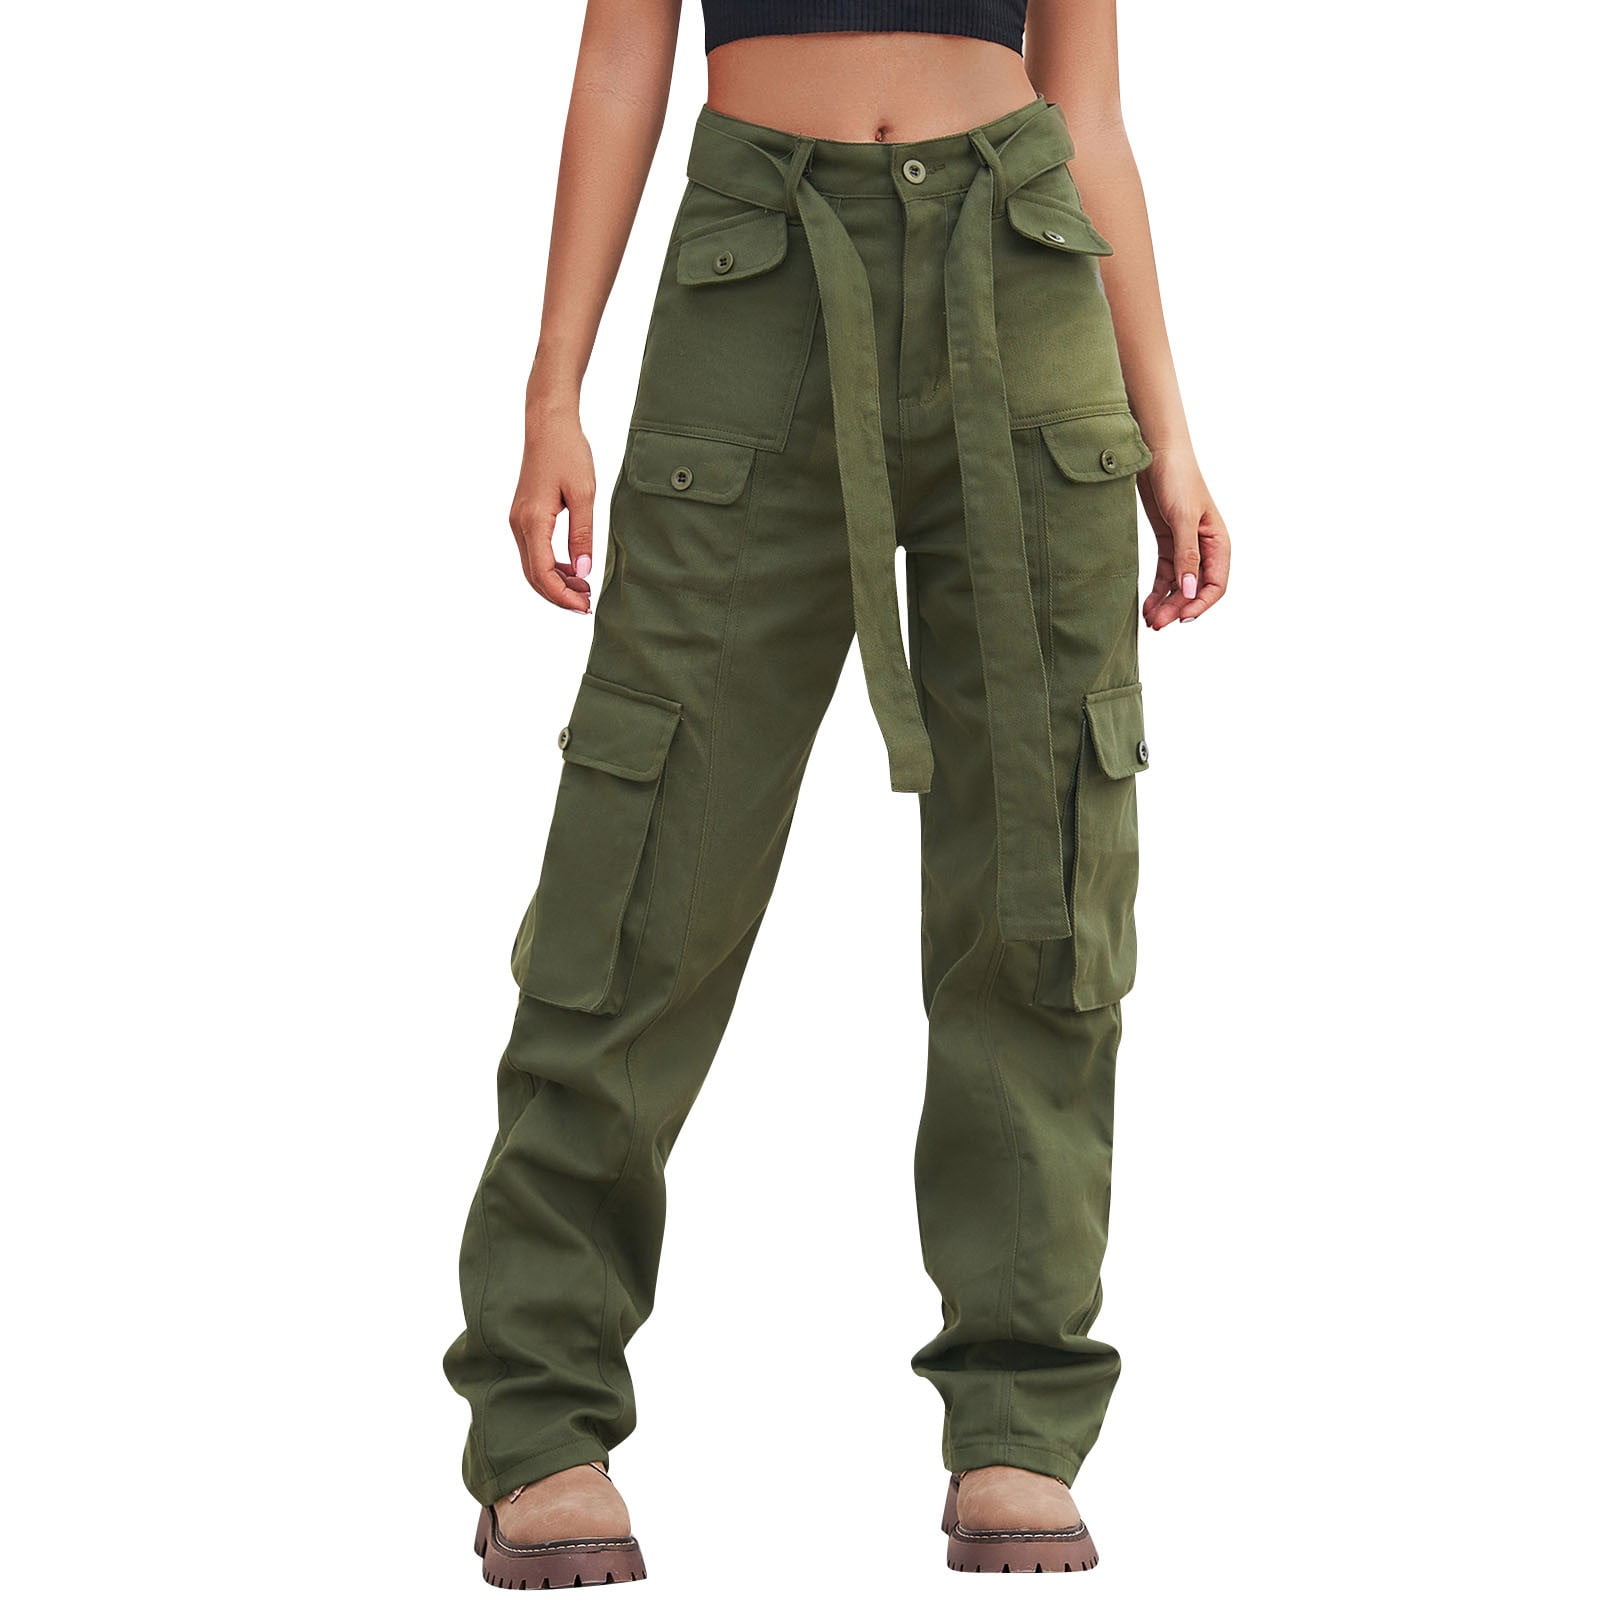  Miyaomn Womens Lightweight Cardigan Womens Solid Drawstring  Elastic Waist Cargo Pants with Flap Pocket Casual Baggy Loose Comfortable  Wide Leg Sweatpants(Army Green,X-Small) : Clothing, Shoes & Jewelry